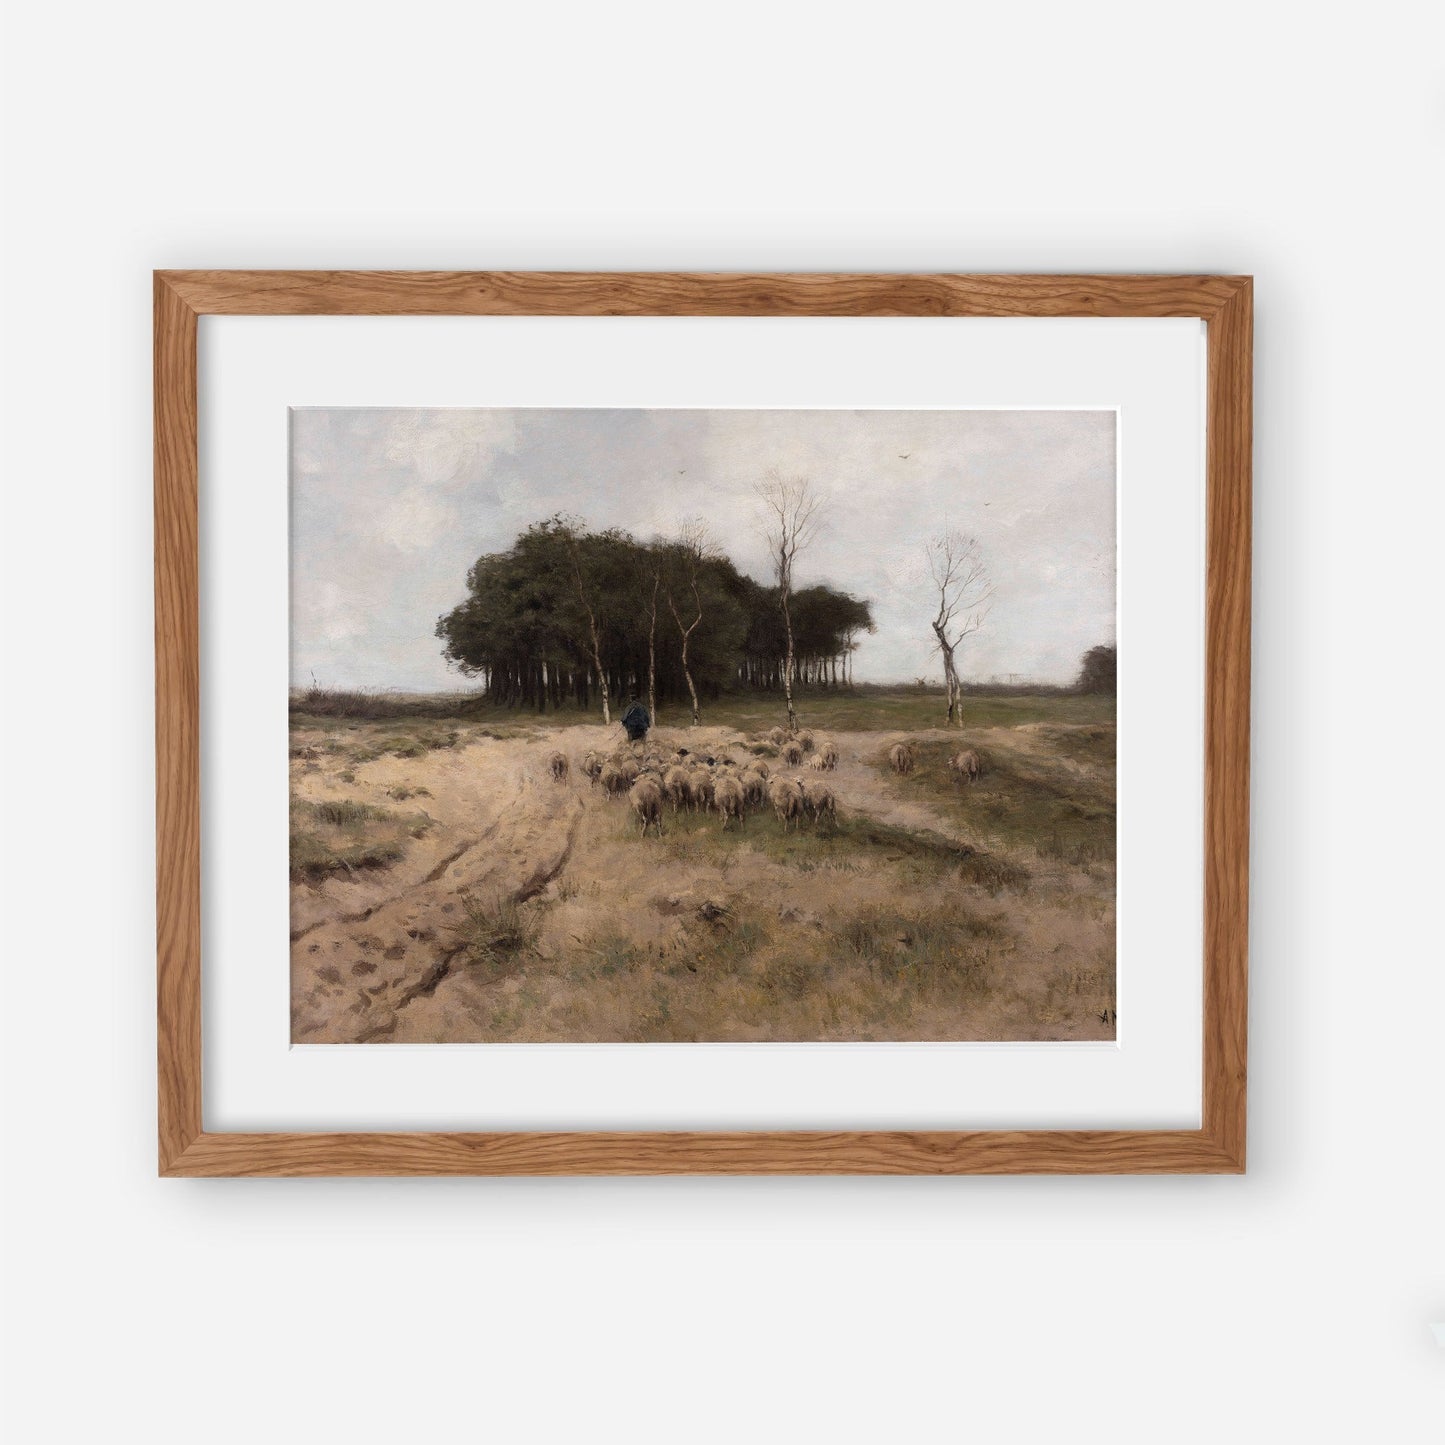 Vintage Farm with Sheep Wall Art - Digital Oil Painting - Vintage poster print - Fine art print - Printed and Shipped to you